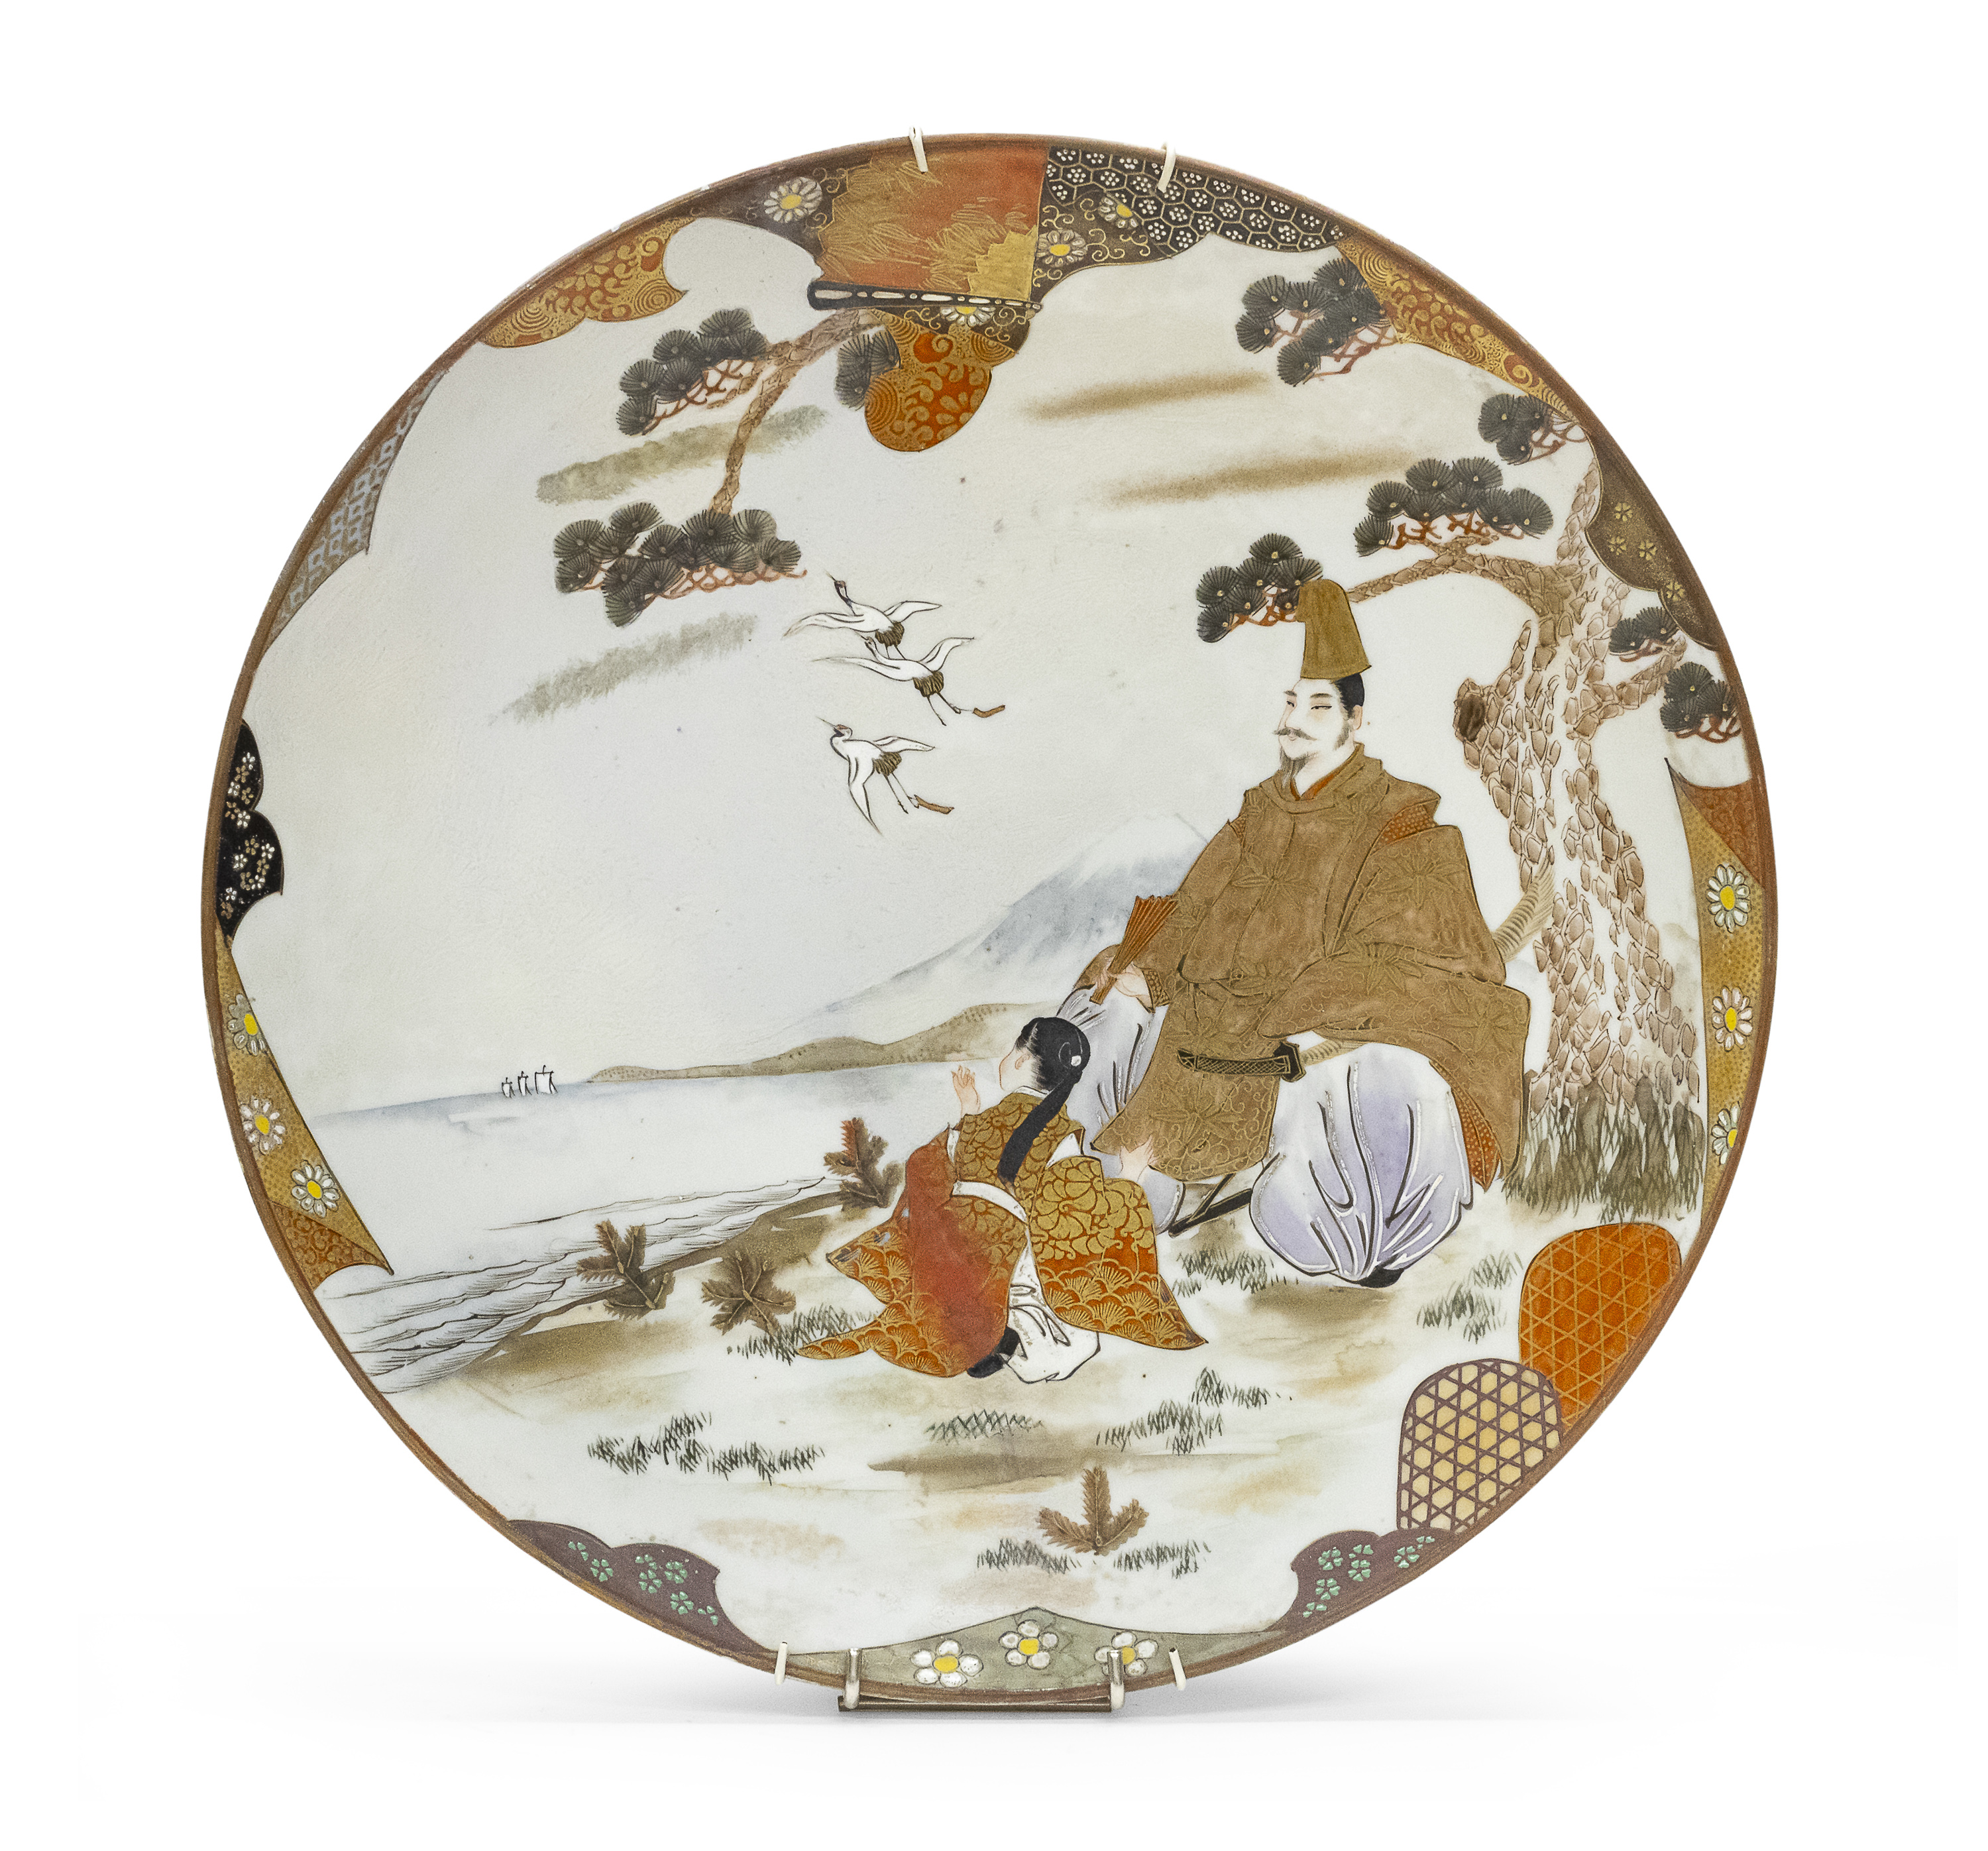 A JAPANESE POLYCHROME AND GOLD ENAMELED PORCELAIN PLATE LATE 19TH CENTURY